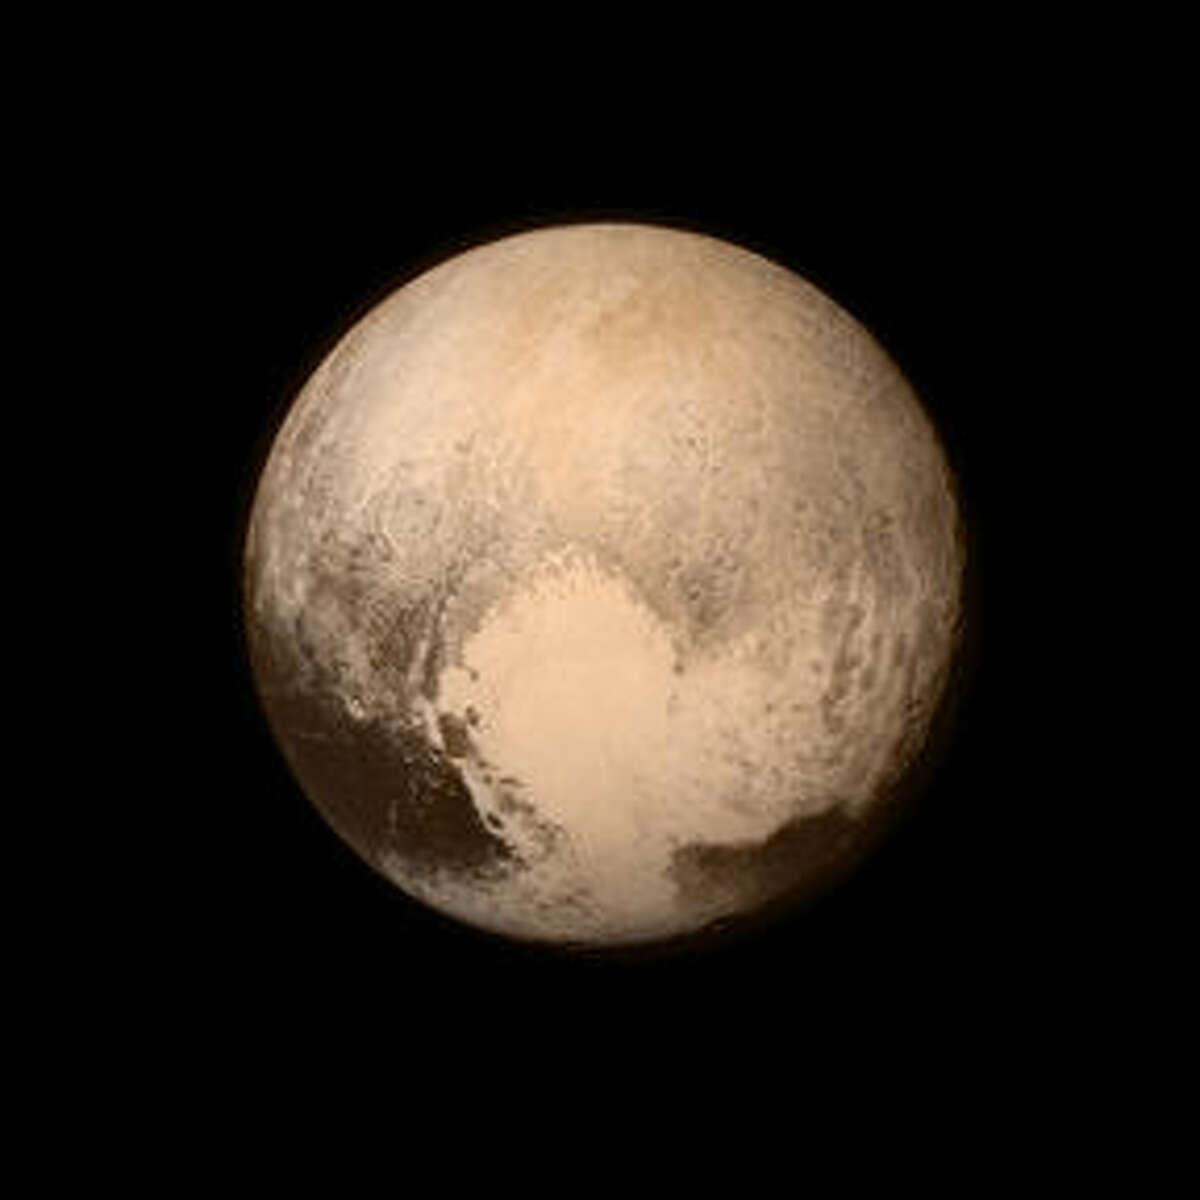 This Monday image provided shows Pluto from the New Horizons spacecraft. 